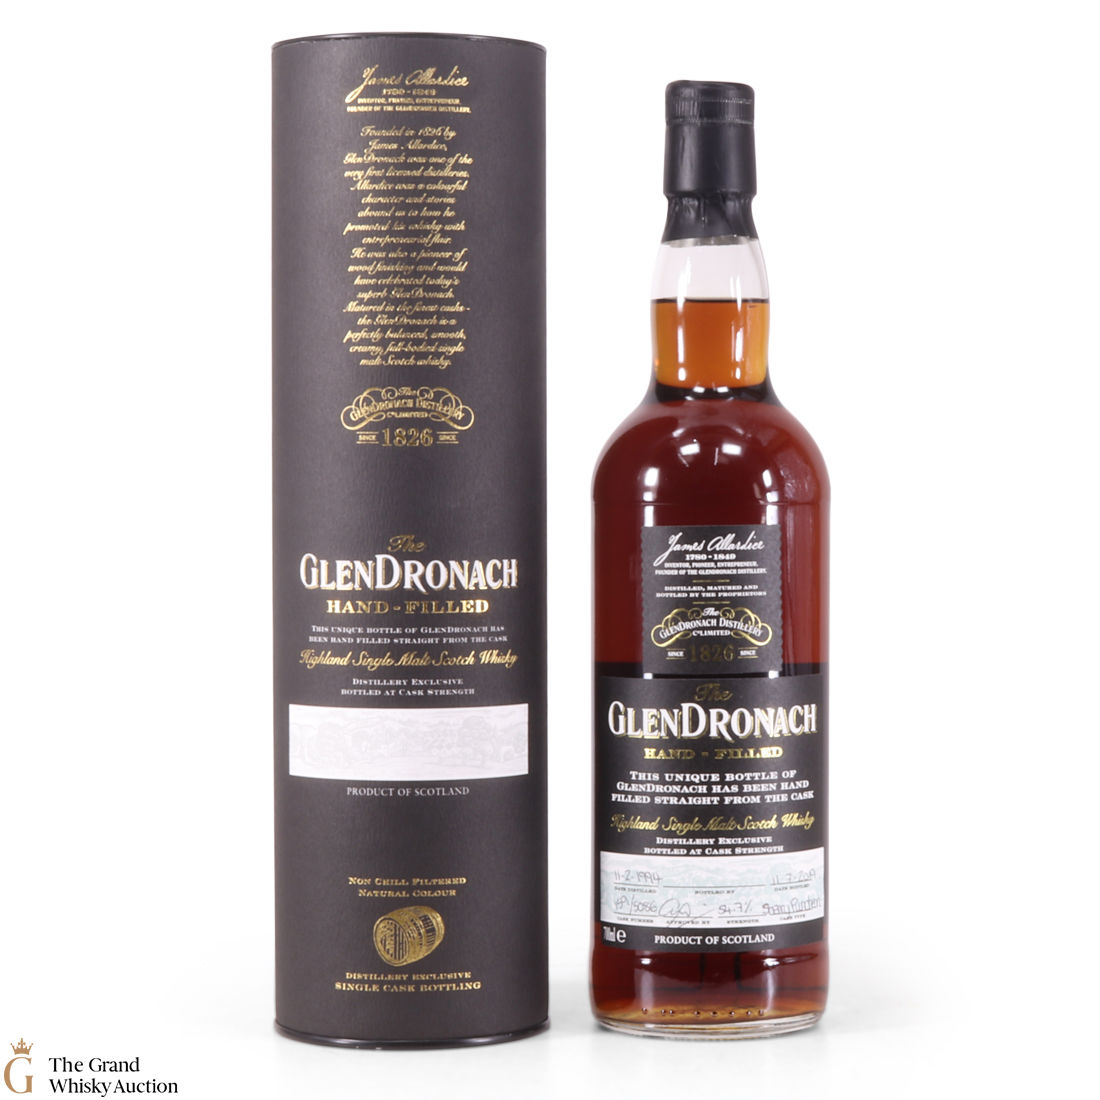 Glendronach - Hand Filled 1994 - Cask #5086 Auction | The Grand Whisky ...